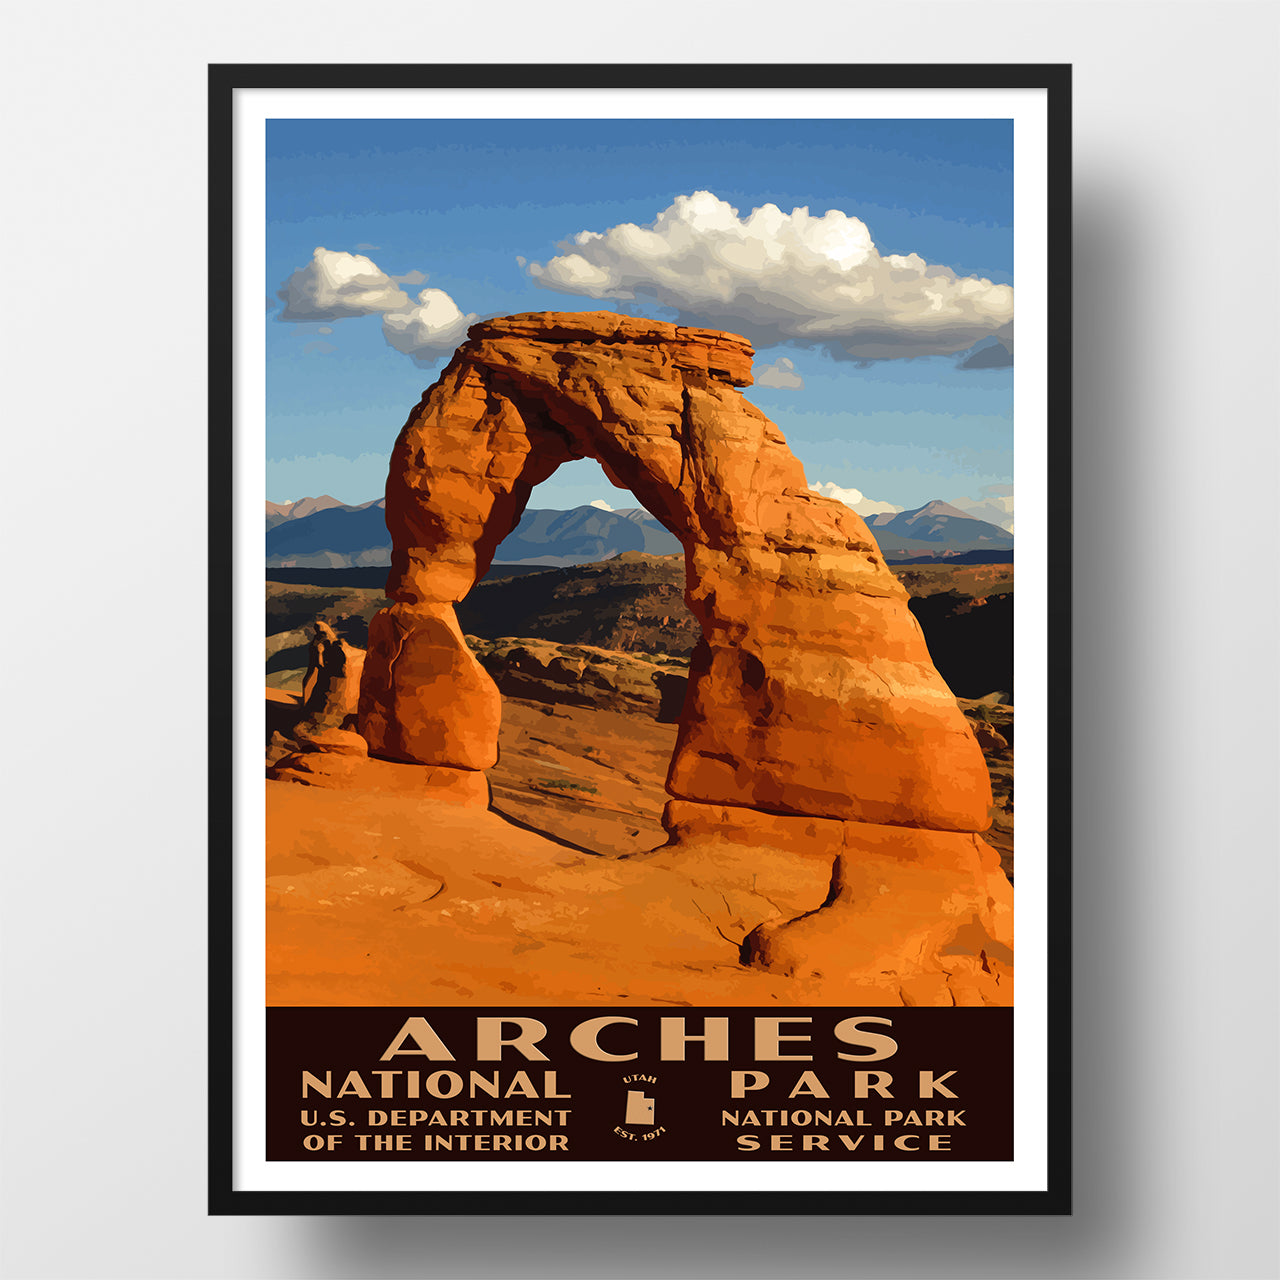 Arches National Park Poster, WPA Style, Delicate Arch